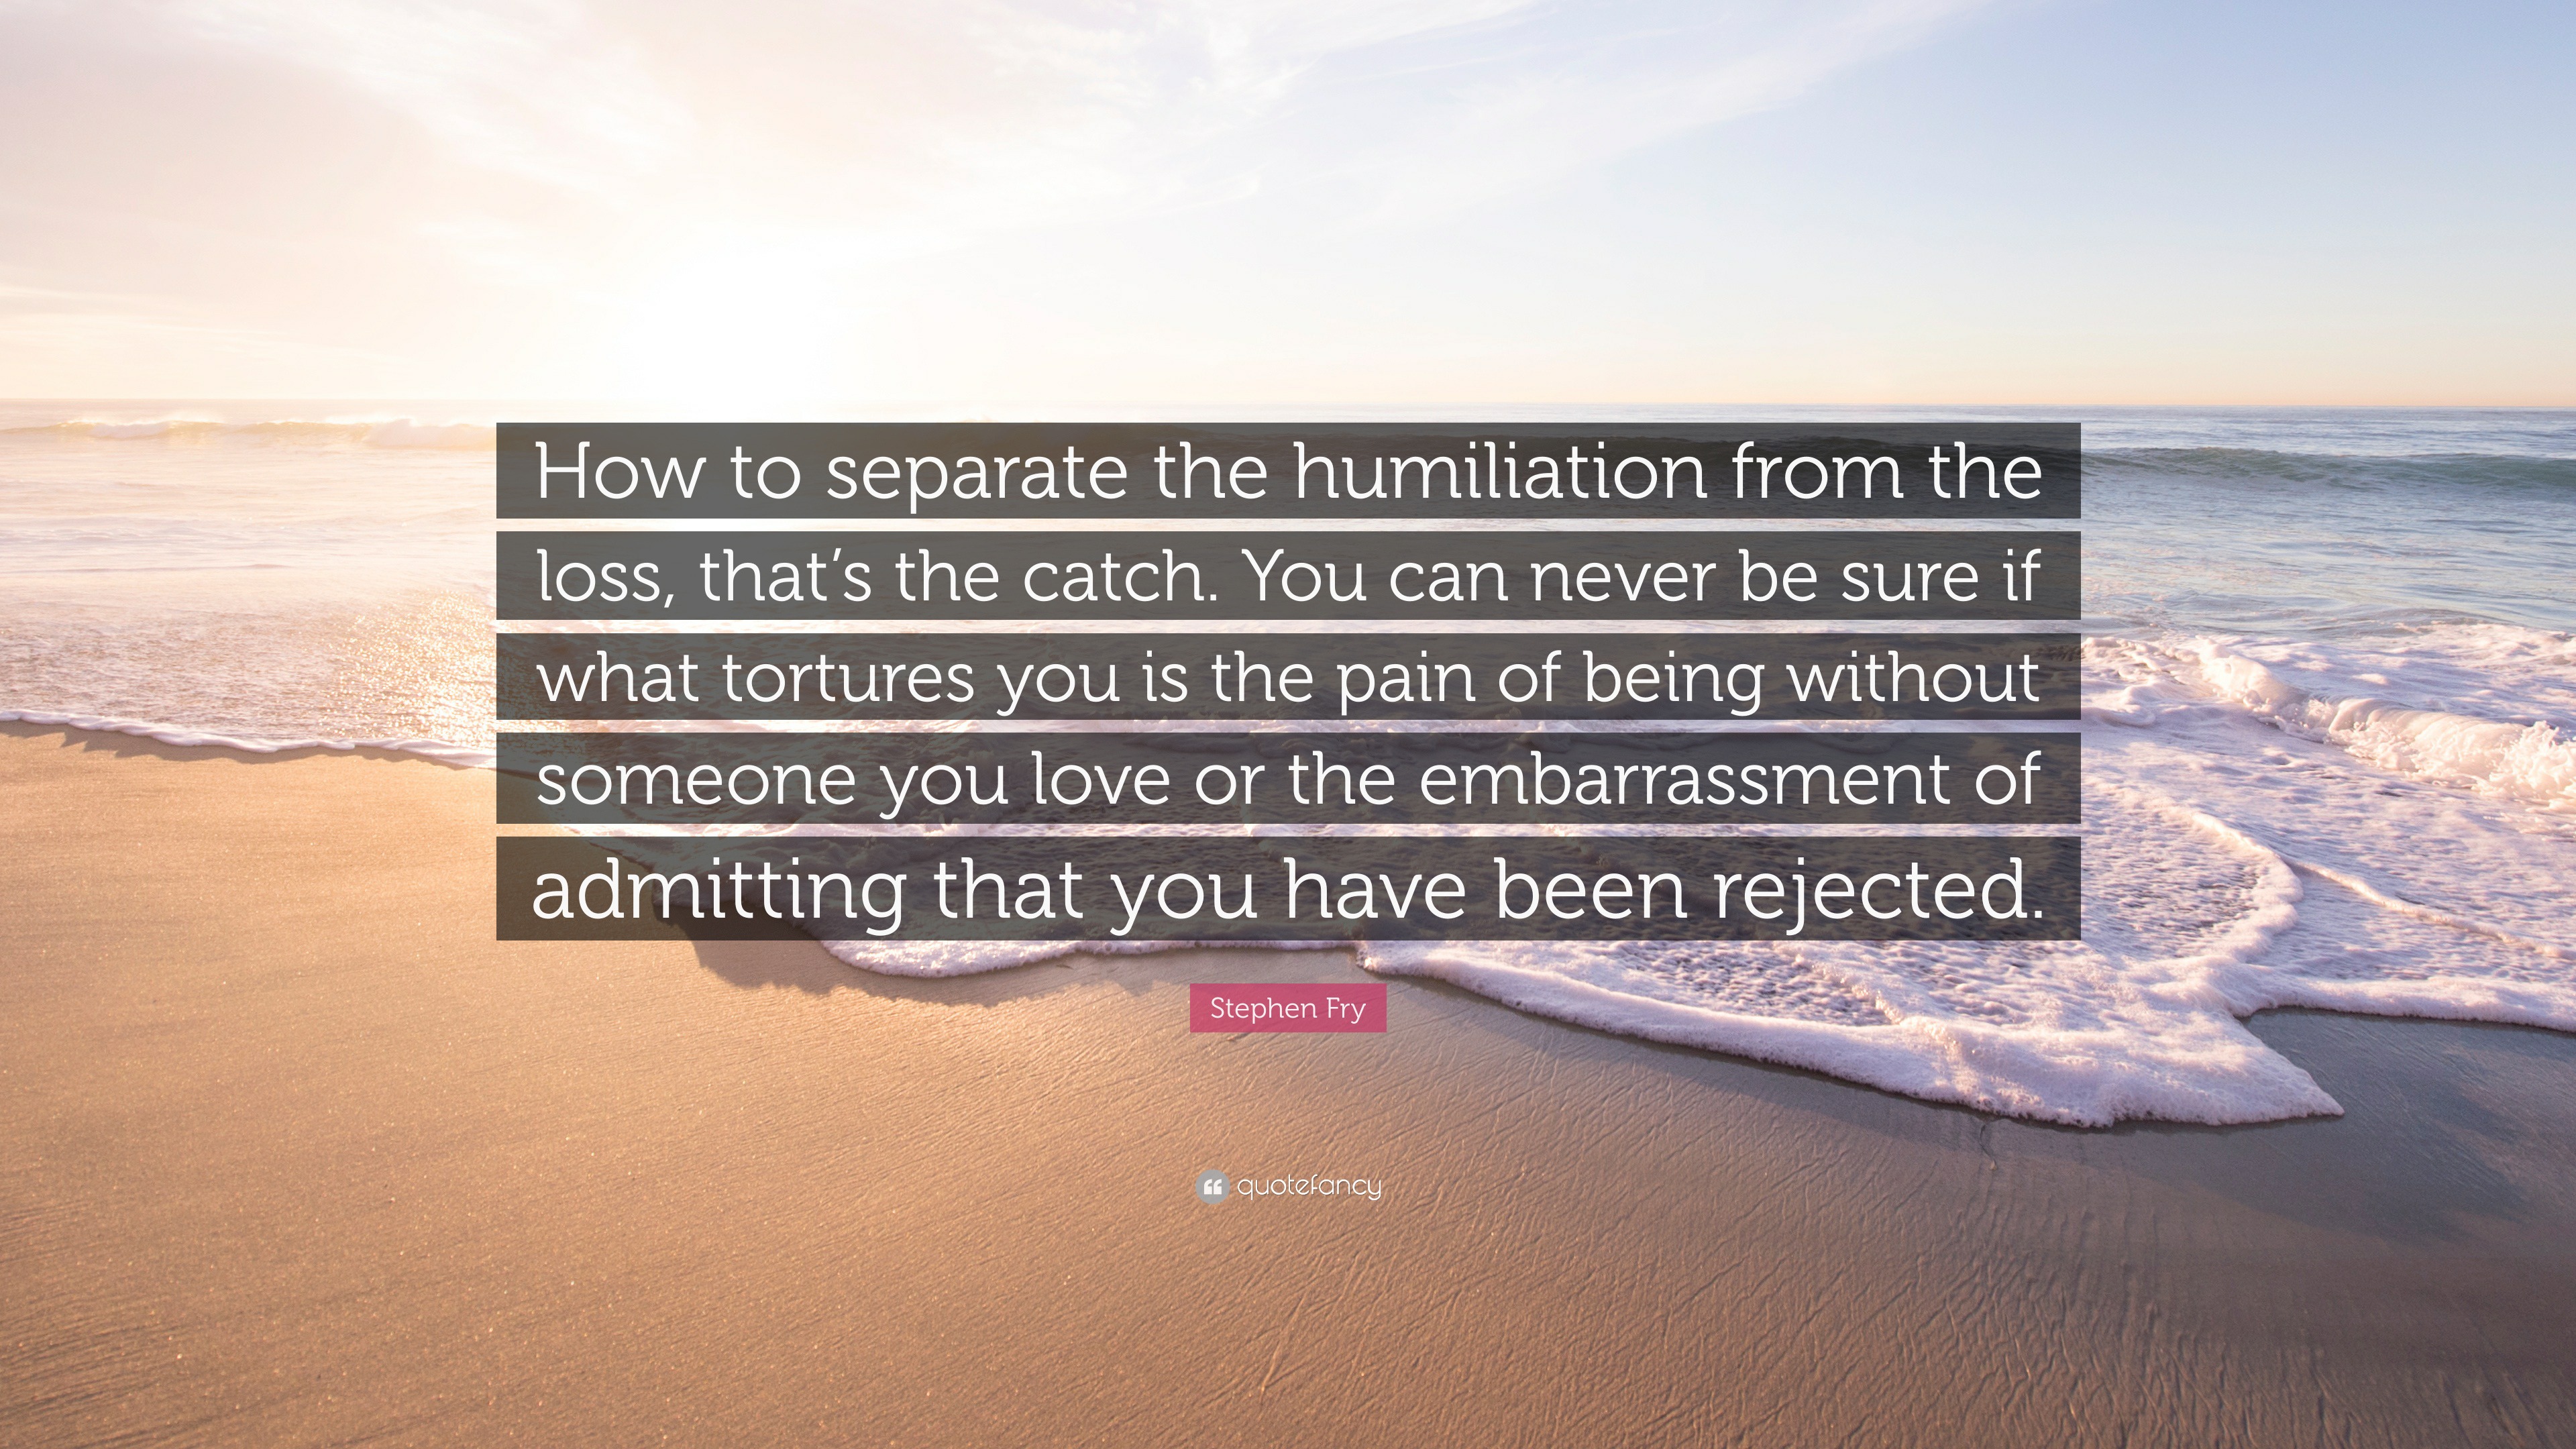 Stephen Fry Quote “How to seperate the humiliation from the loss that s the